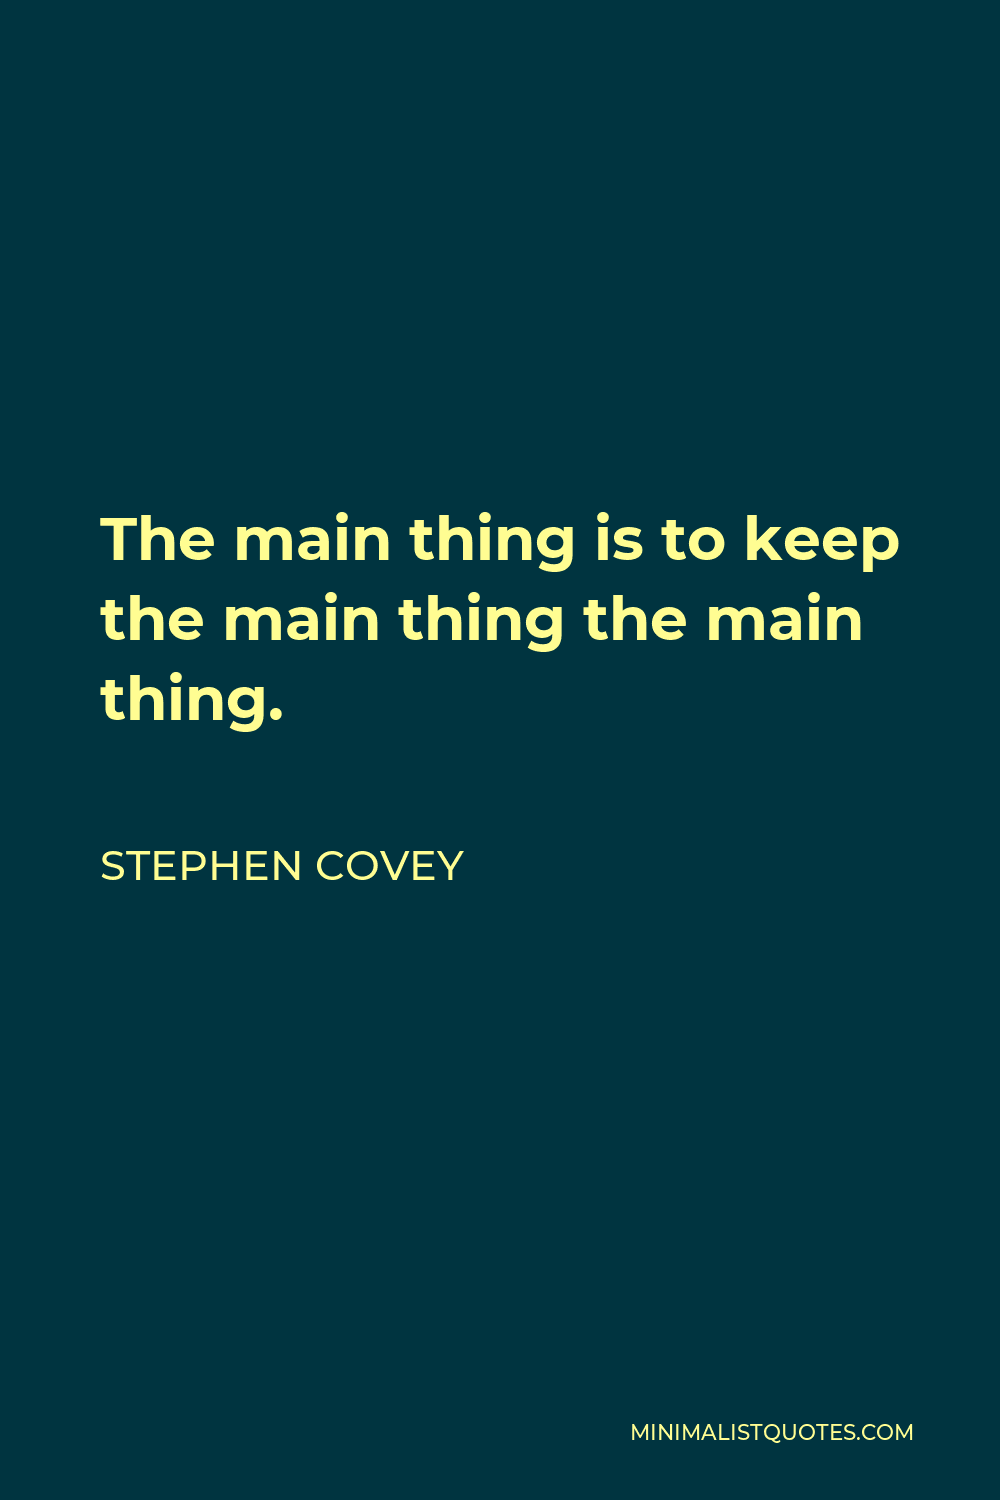 Stephen Covey Quote - The main thing is to keep the main thing the main thing.